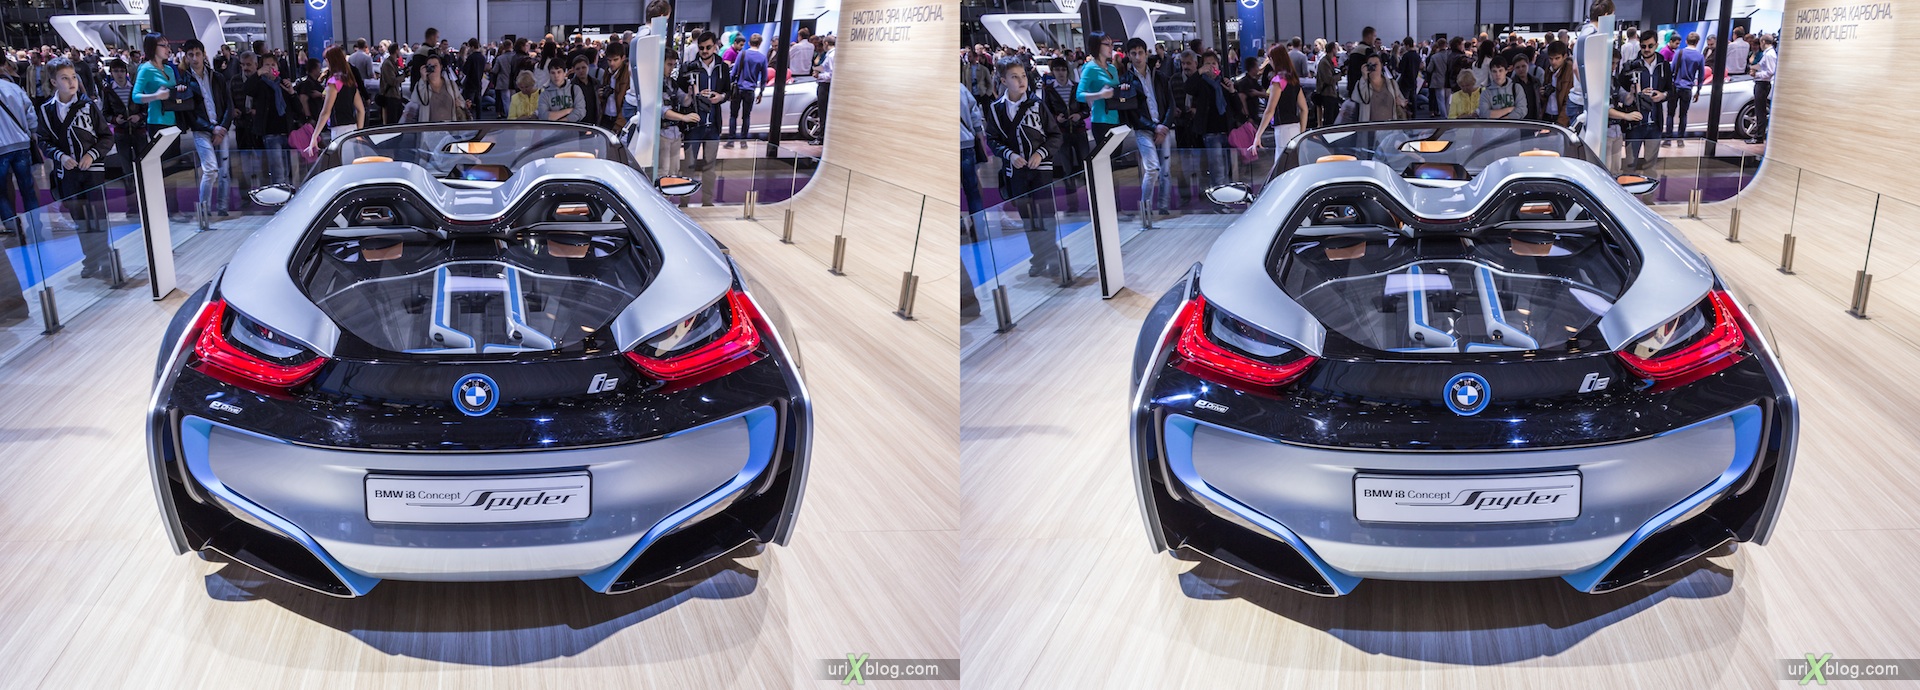 2012, BMW i8 Concept Spyder, Moscow International Automobile Salon, auto show, 3D, stereo pair, cross-eyed, crossview